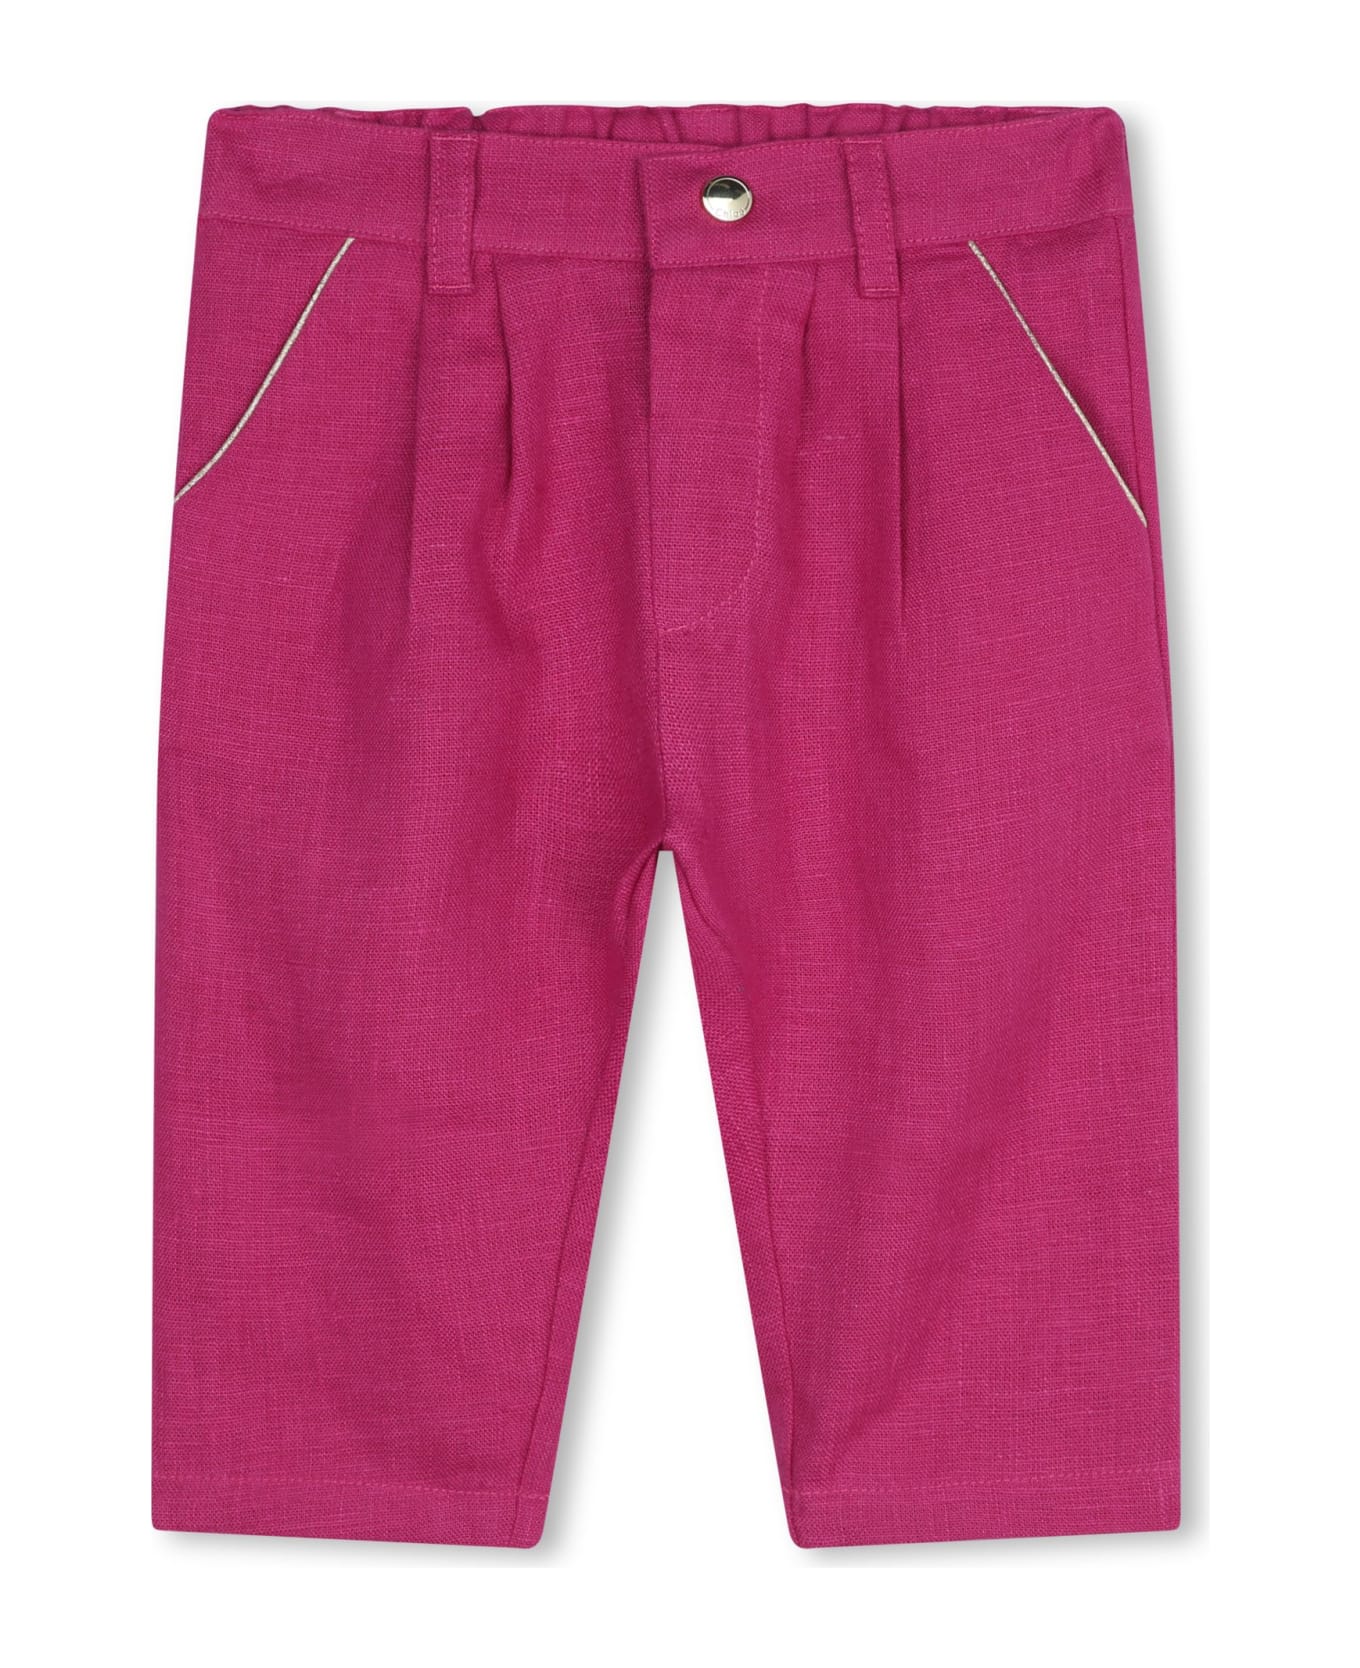 Chloé Trousers With Embroidery - Pink ボトムス